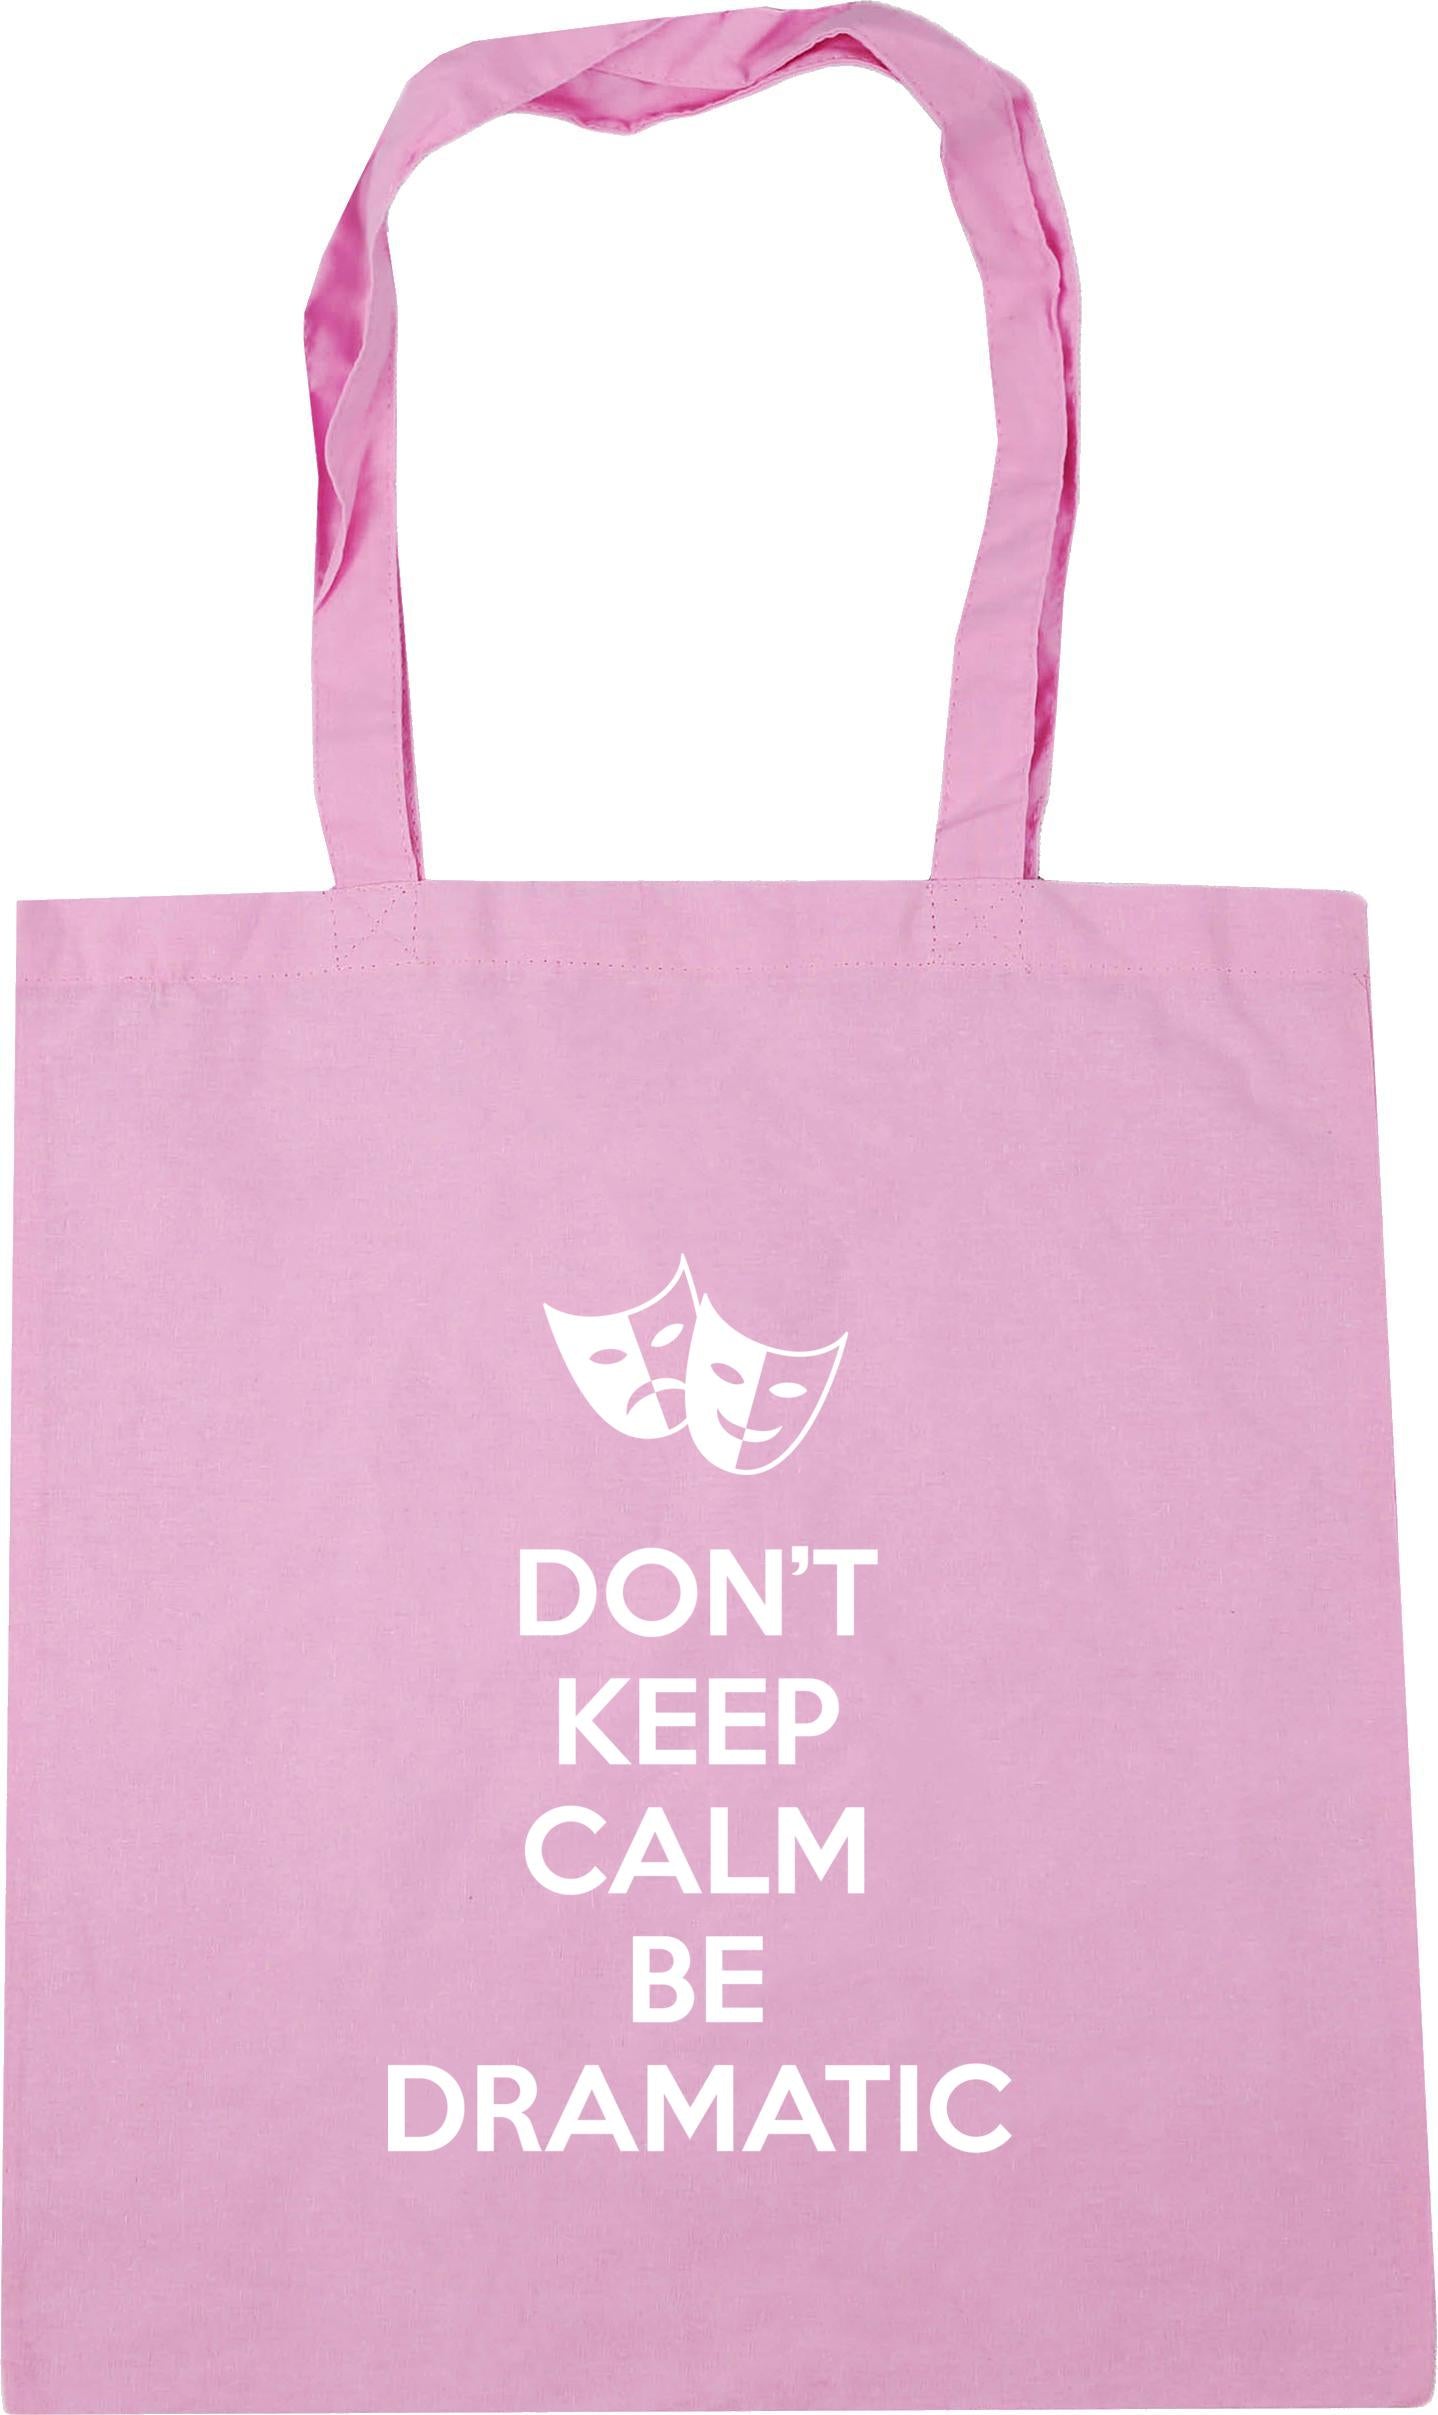 Don't Keep Calm Be Dramatic Tote Bag